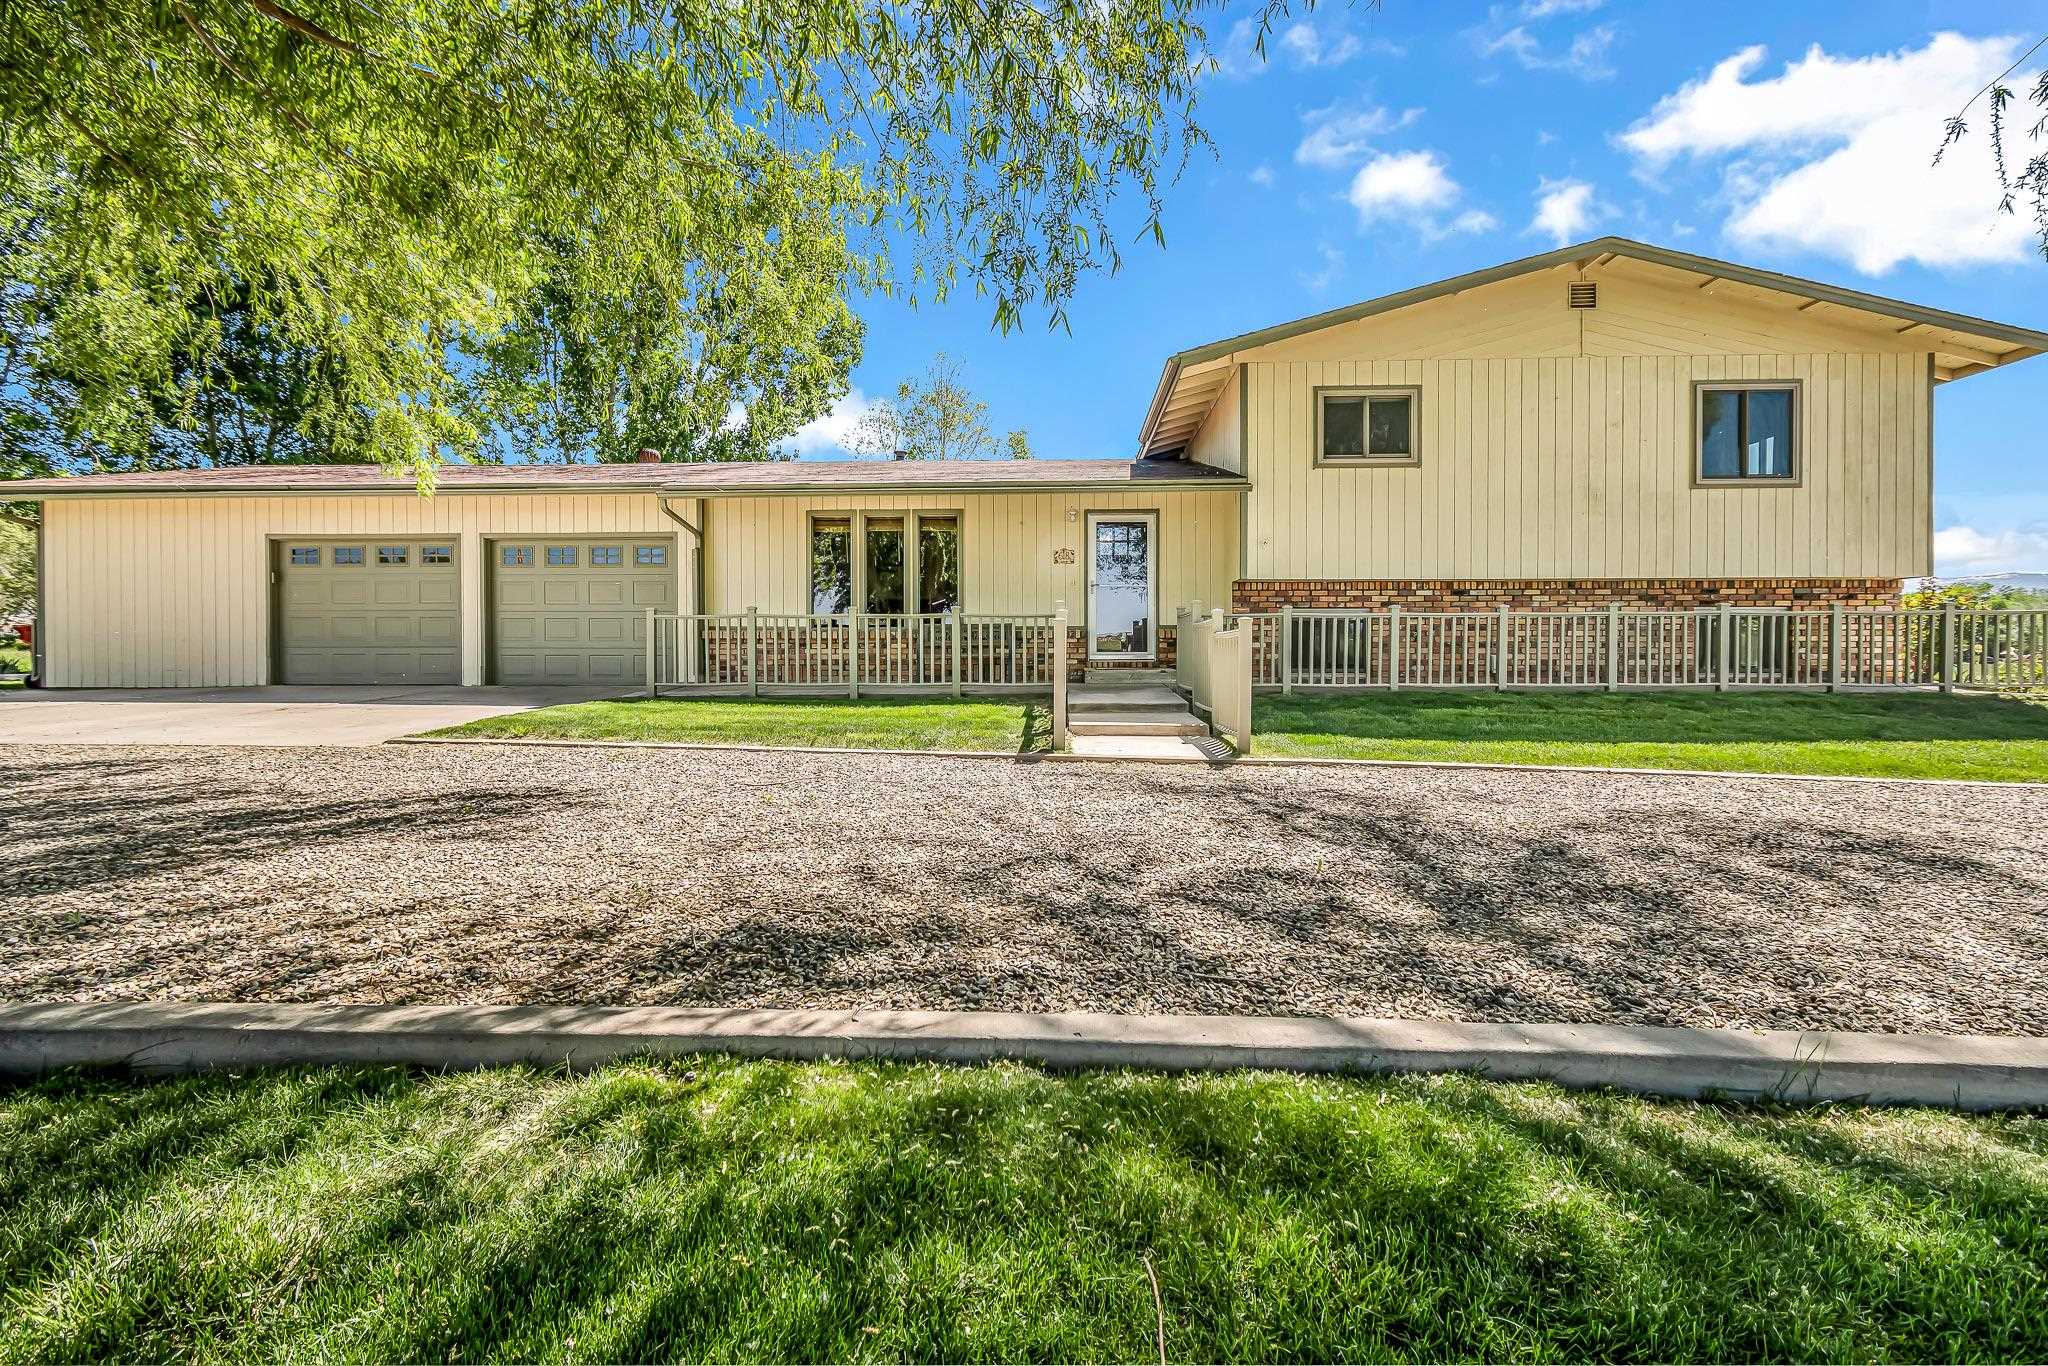 This 4-bedroom, 3.5 bathroom home is located on 9.57 acres in the heart of the Mesa County’s agricultural mecca near Palisade. The home is a 2304 sf, tri-level design that was built in 1977 with unprecedented views of Grand Mesa.  The recently remodeled kitchen’s cute farm style design includes granite countertops, double ovens, gas cook-top, wine fridge and a large pantry area. There are two separate living areas – one on the main floor as you enter the home and the second is in the lower part of the home. Large windows (new in 2022) are found throughout the home allowing for maximum natural light throughout. Flooring includes hardwood, carpet and tile. There is an oversized 2 car garage attached to the home with a large storage area, ½ bath and office area.  Step outside onto the east facing patio with a new louvered pergola for relaxation and enjoy beautiful views of Grand Mesa and Mt. Garfield.  There is a 30’ X 50’ metal garage / workshop with an RV hookup. A large 50’ long covered carport area alongside the exterior of the garage works perfectly for either hay storage or as a covered area to park an RV. The property was previously home to an Alpaca farm. Although the Alpaca farm is no longer in business, the property is still set up with an arena area. The panels have been removed so the new owner would need to replace the panels. Potable water is available to allow for fresh water to be delivered within the arena / corral area. There is no HOA and livestock are allowed on the property. A chicken coop that currently houses 5 hens is also included. The grass hay that is grown on the property is a high quality variety that is perfect for alpacas and horses alike. The owners currently get 3 cuttings a year with an approximate yield of 550– 600 bales. The bales are approximately 75 lbs each and are selling this year for $9 each. The field has been maintained with proper fertilization and a neighbor processes (cuts, bales and stacks) the hay for each cutting. There is gated pipe that is included in the purchase price. The property has approximately 10 shares of Price Ditch water that is delivered to the property. The cost for the irrigation water is assessed thru the annual property taxes. The property is zoned AFT. It is not common to find a quality property of this size available anywhere in the Grand Valley area, let alone in such close proximity to Palisade.